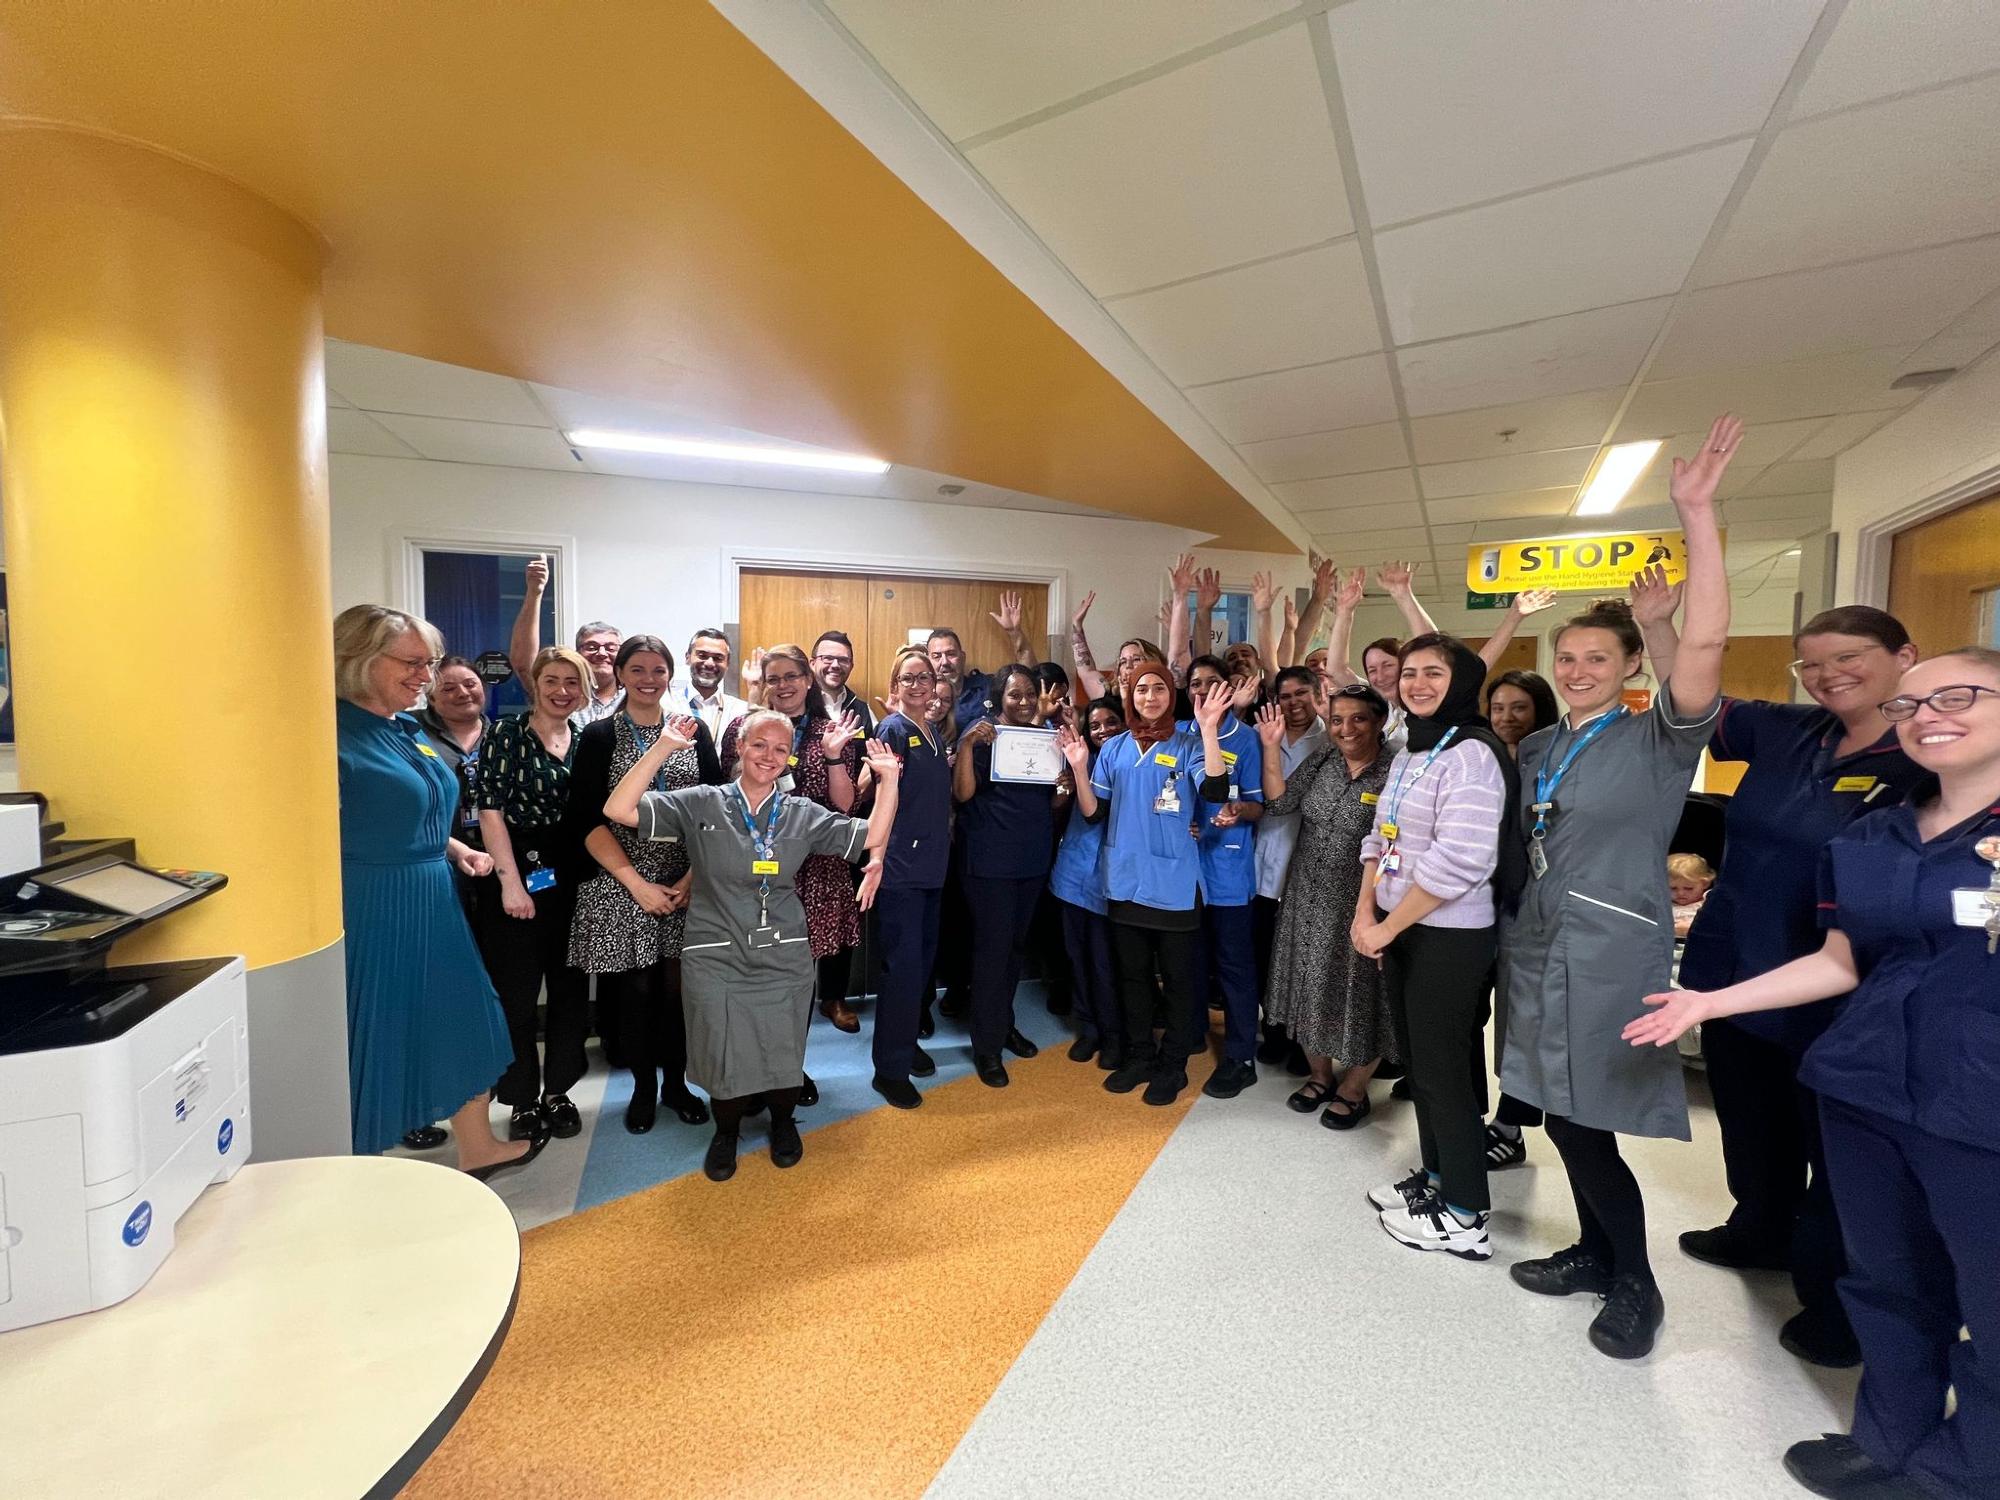 Picture of Harvest B ward accreditation, all of the ward sisters and staff members standing together cheering